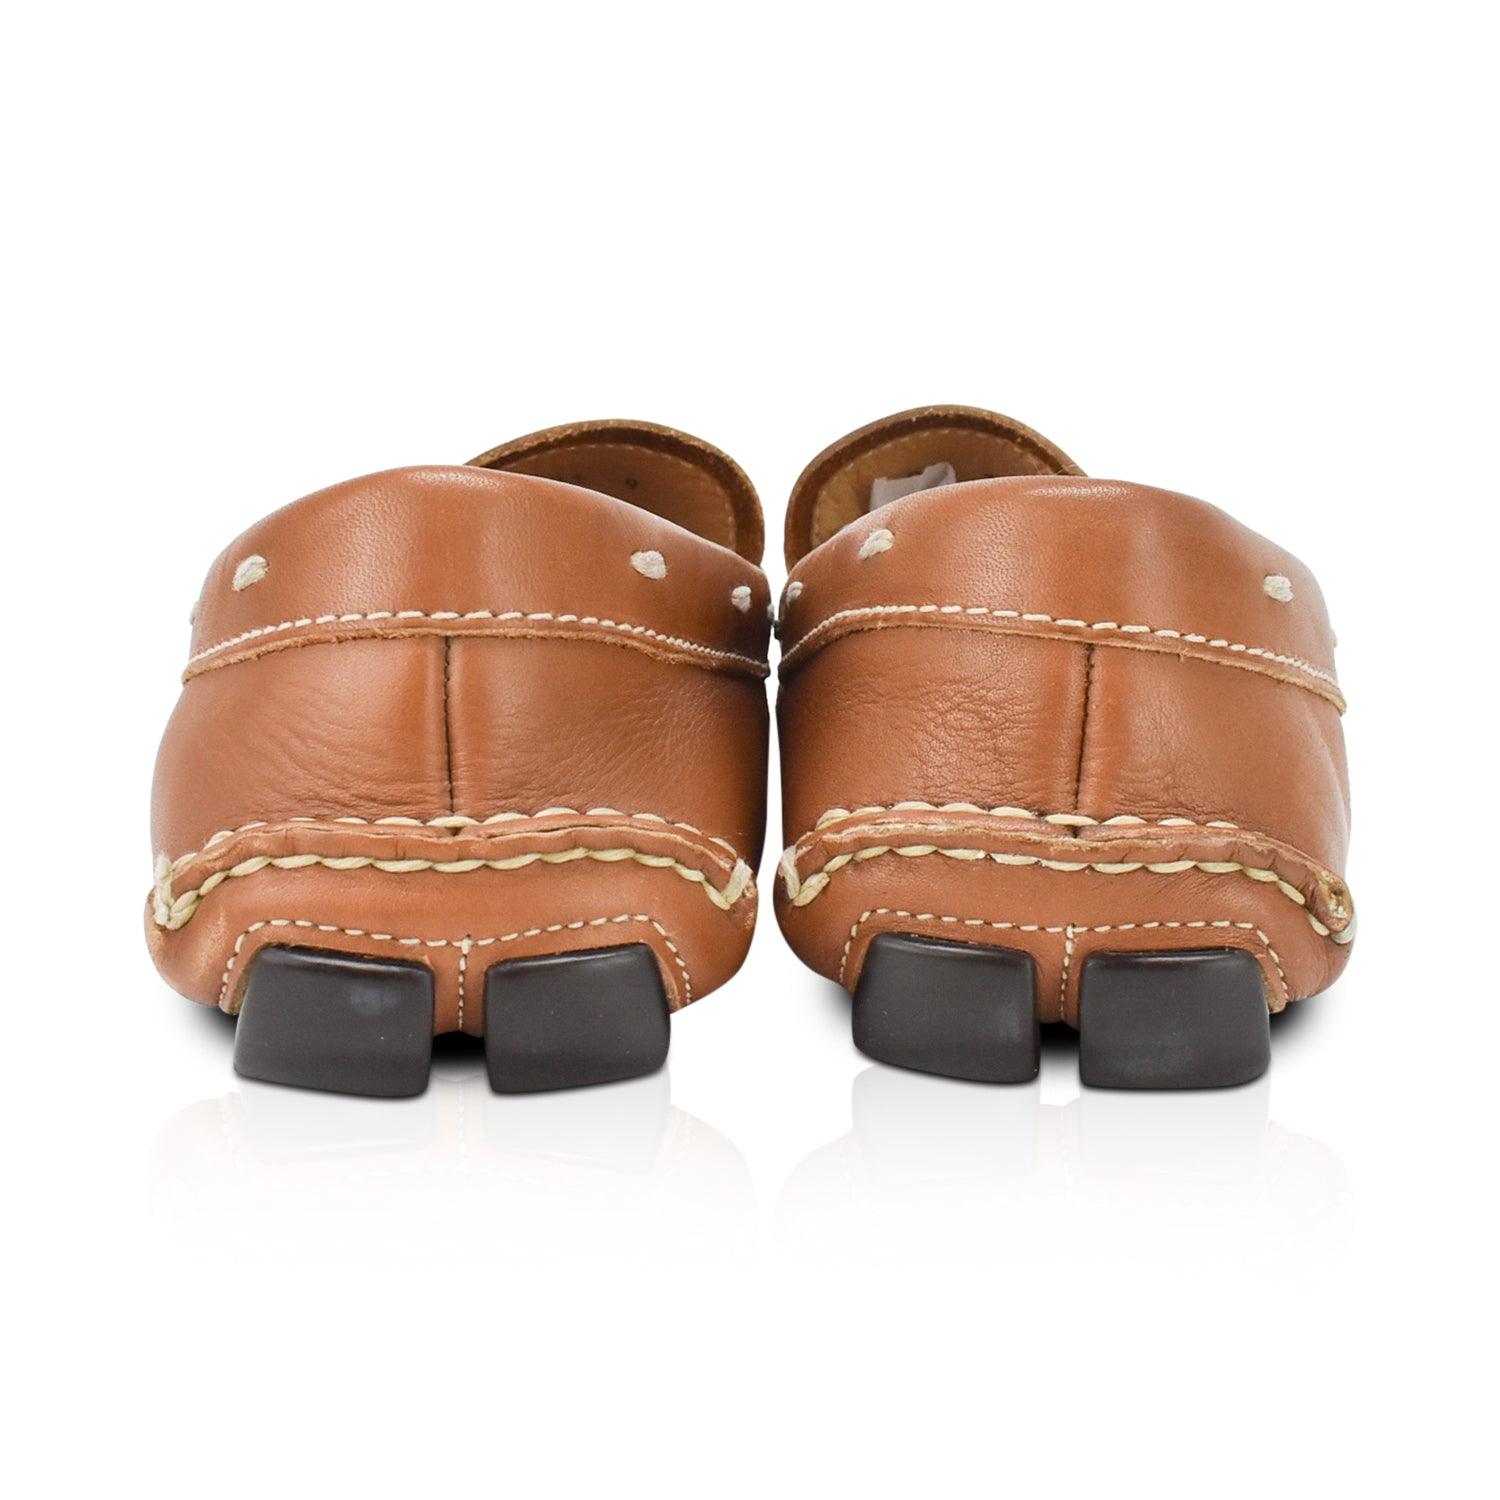 Prada Loafers - Men's 9 - Fashionably Yours